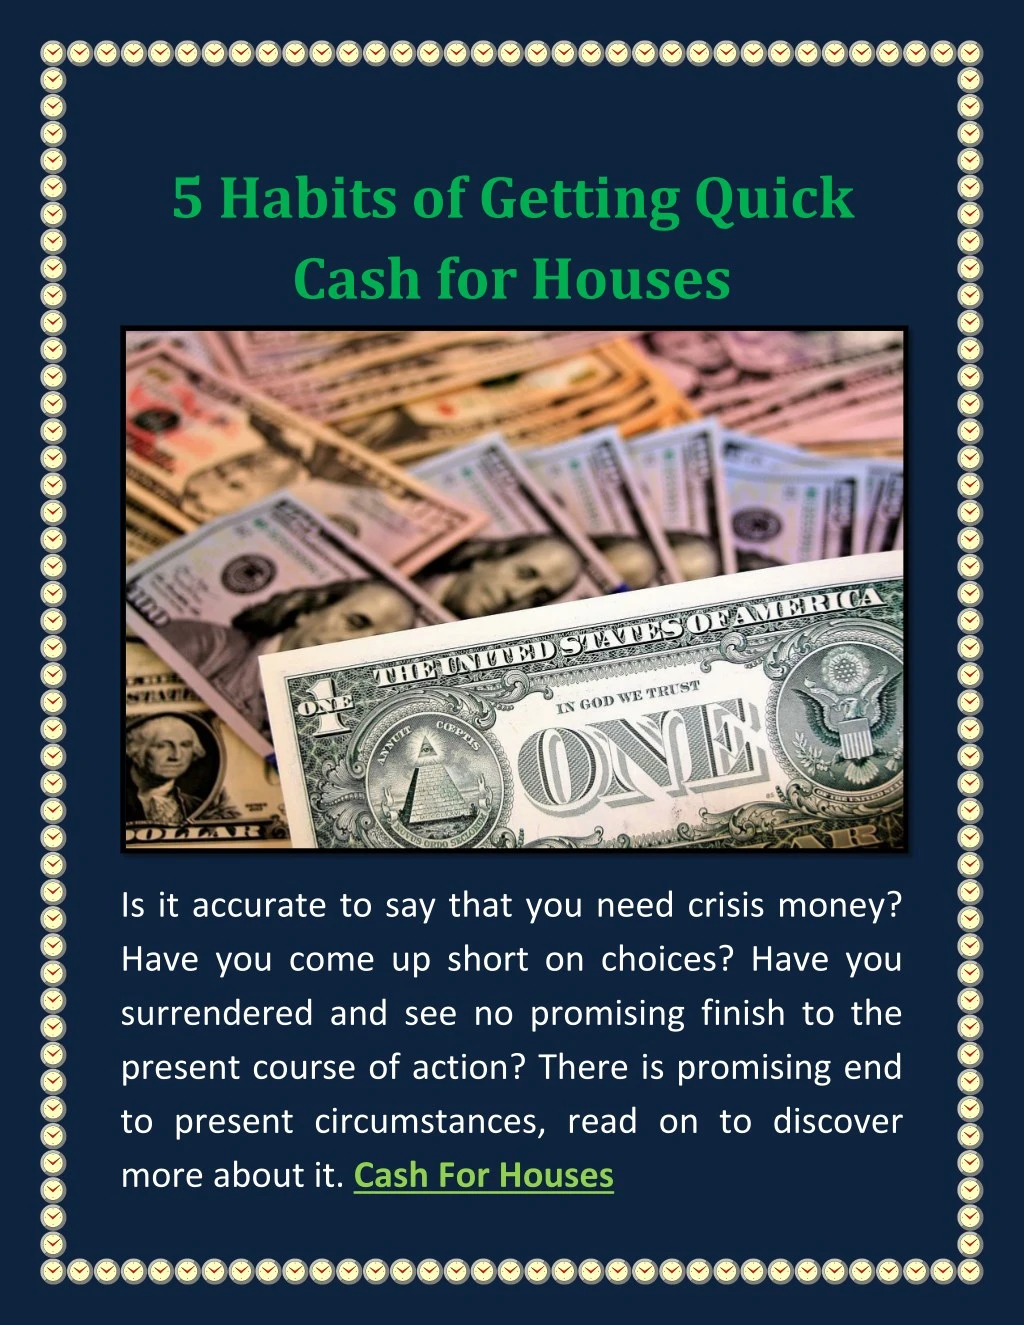 5 habits of getting quick cash for houses